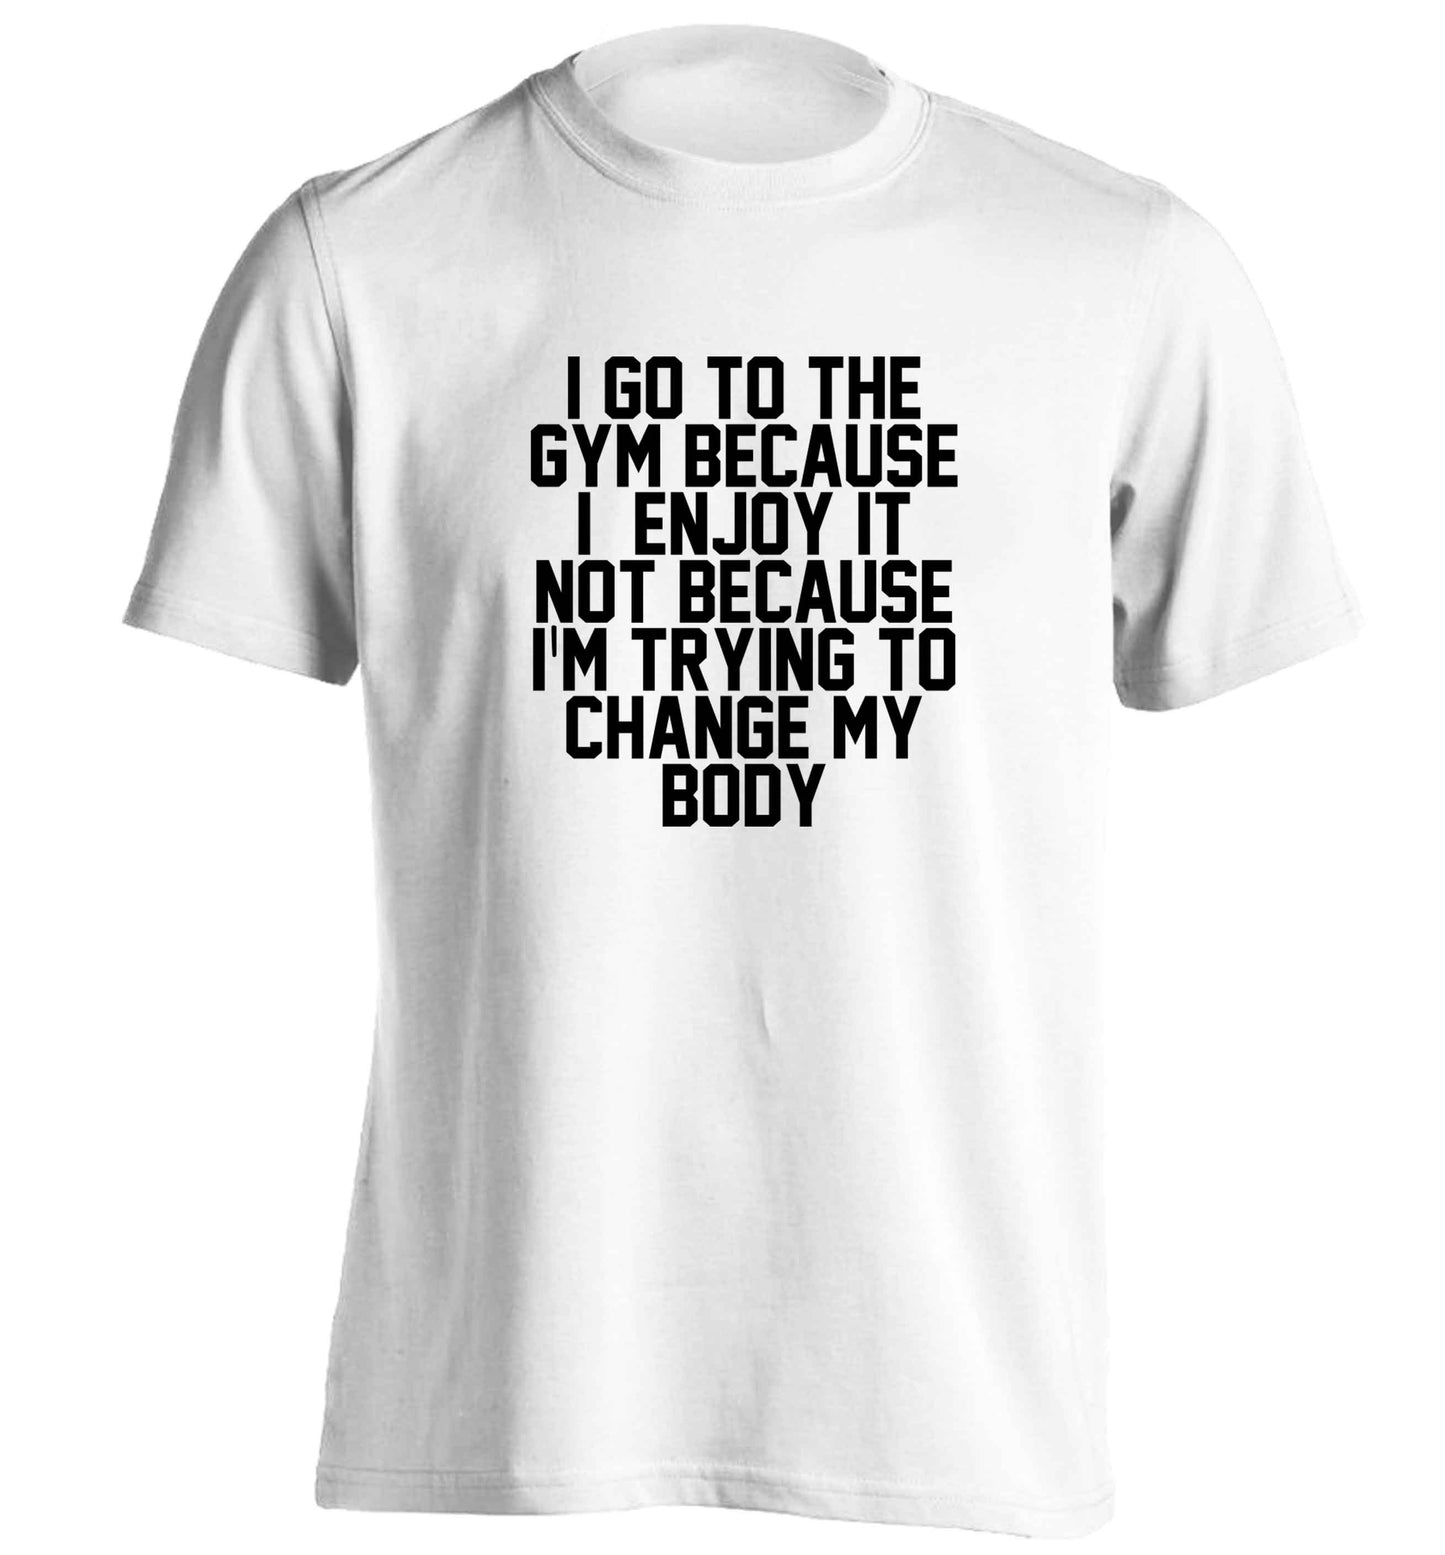 I go to the gym because I enjoy it not because I'm trying to change my body adults unisex white Tshirt 2XL